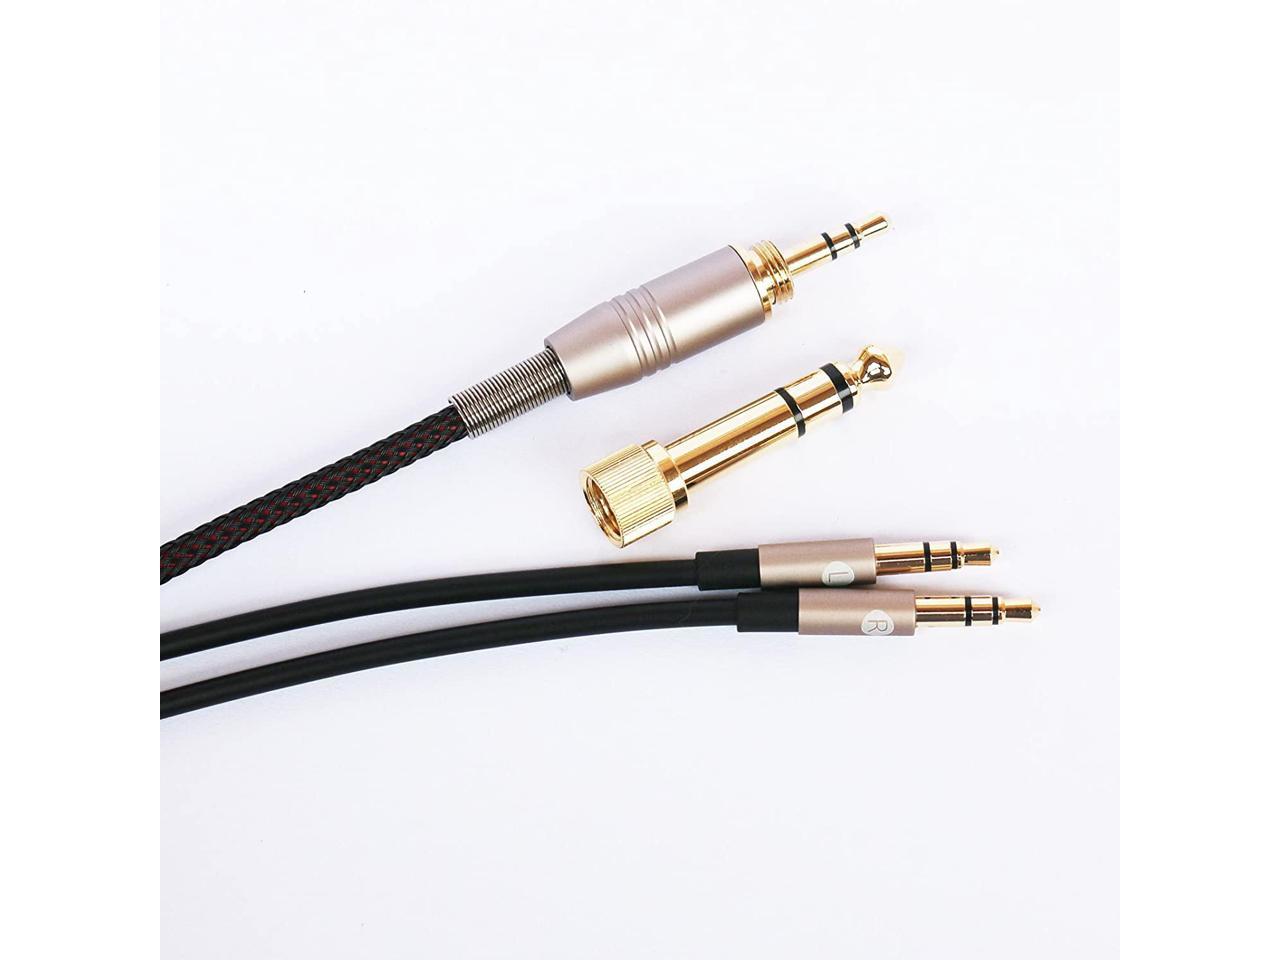 NEW NEOMUSICIA Replacement Cable Compatible with Hifiman HE4XX HE-400i The Latest Version with Both 3.5mm Plug Headphones 3.5mm & 6.35mm to Dual 3.5mm Jack Male Cord Black 2m/6.6ft